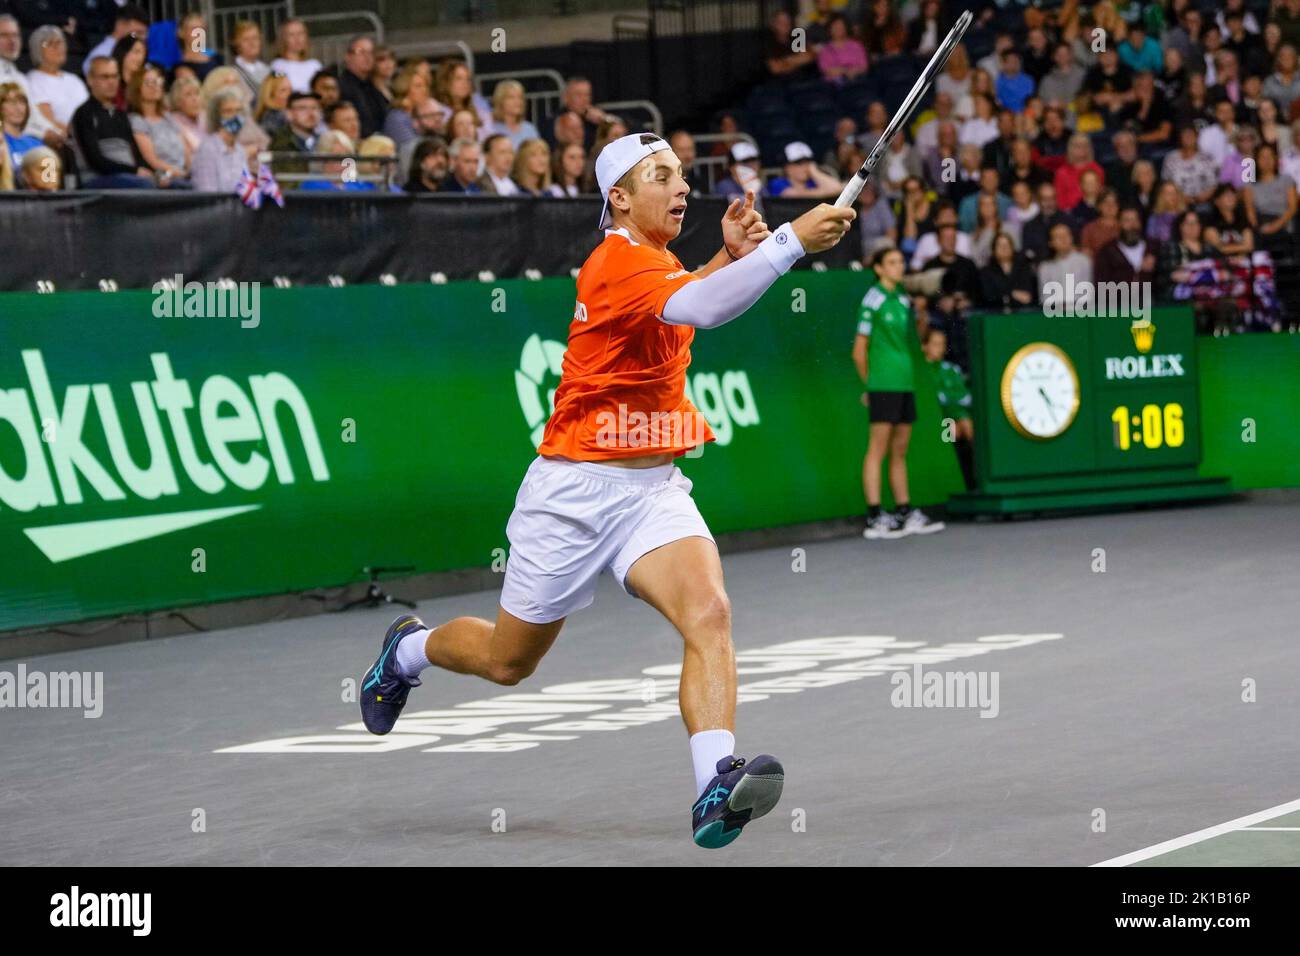 Glasgow, UK. 16th Sep, 2022. GLASGOW, SCOTLAND - SEPTEMBER 16: Tallon Griekspoor of the Netherlands during the Davis Cup by Rakuten Group Stage 2022 Glasgow match between Great Britain and the Netherlands at Emirates Arena on September 16, 2022 in Glasgow, Scotland. Credit: BSR Agency/Alamy Live News Stock Photo